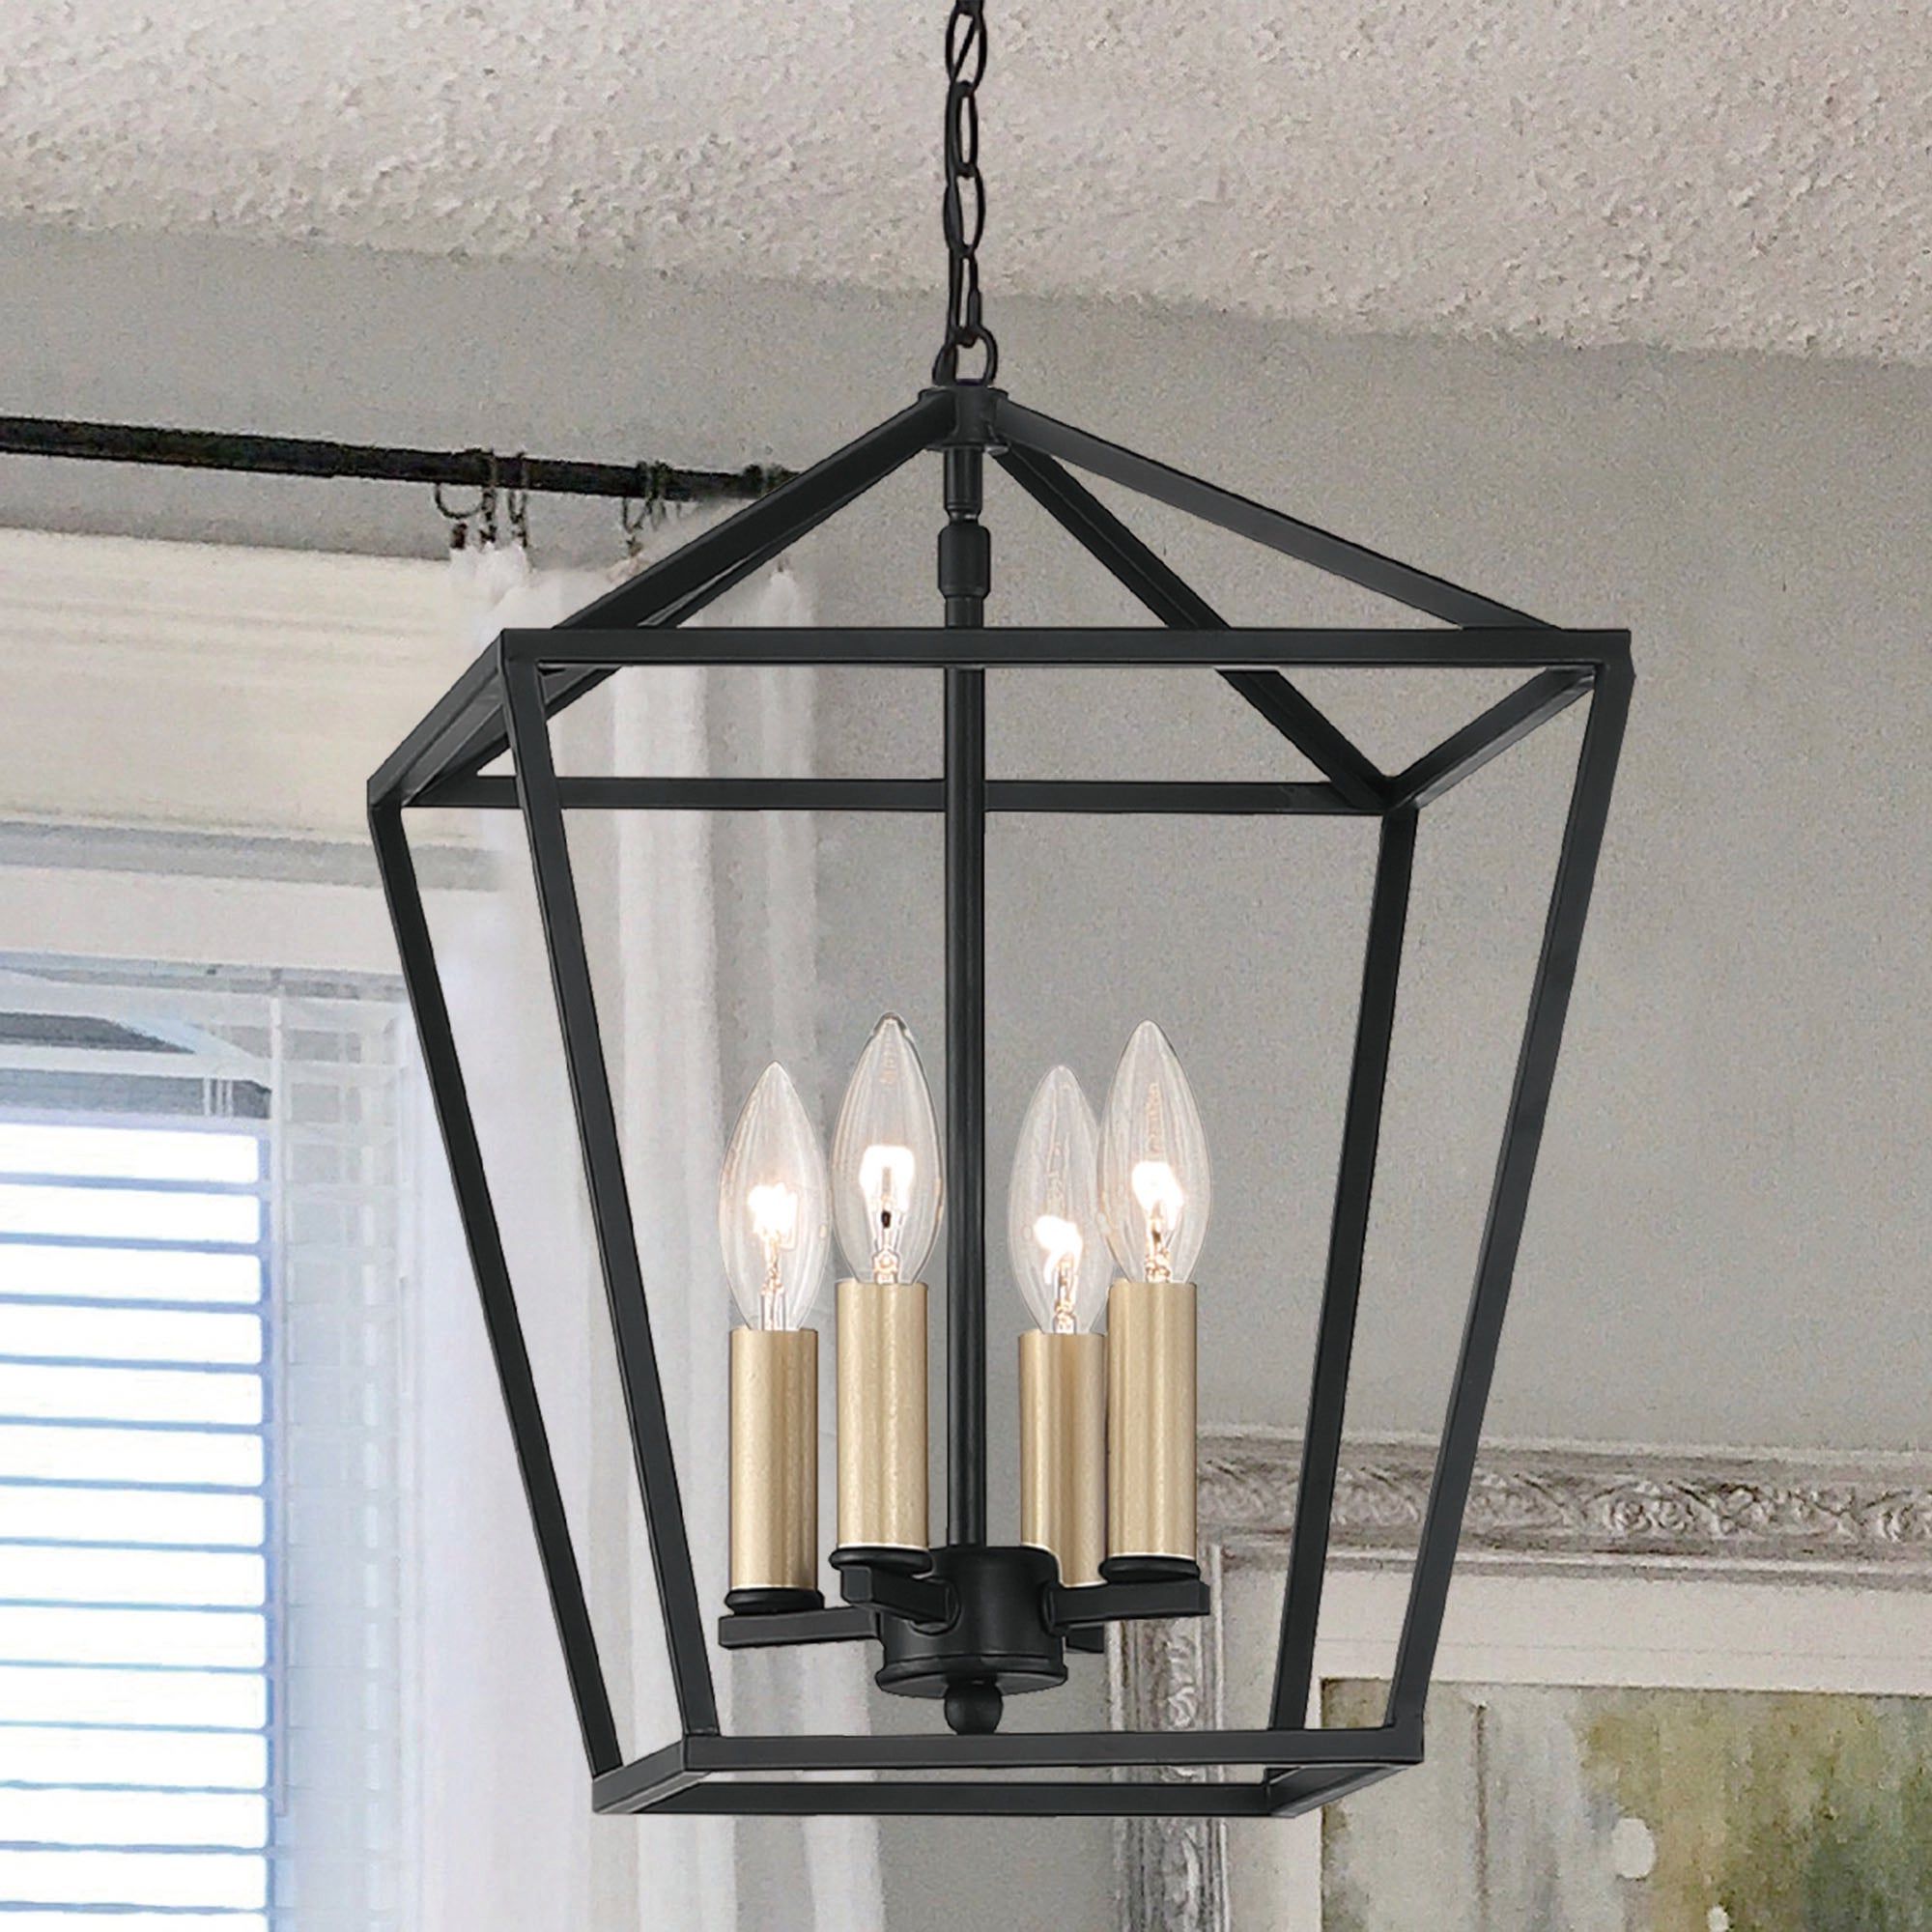 Distressed Black Lantern Chandeliers Pertaining To Most Recently Released The Gray Barn Highclere Farmhouse 4 Light Antique Black Lantern Chandelier  – 11.81"x17"x (View 1 of 15)